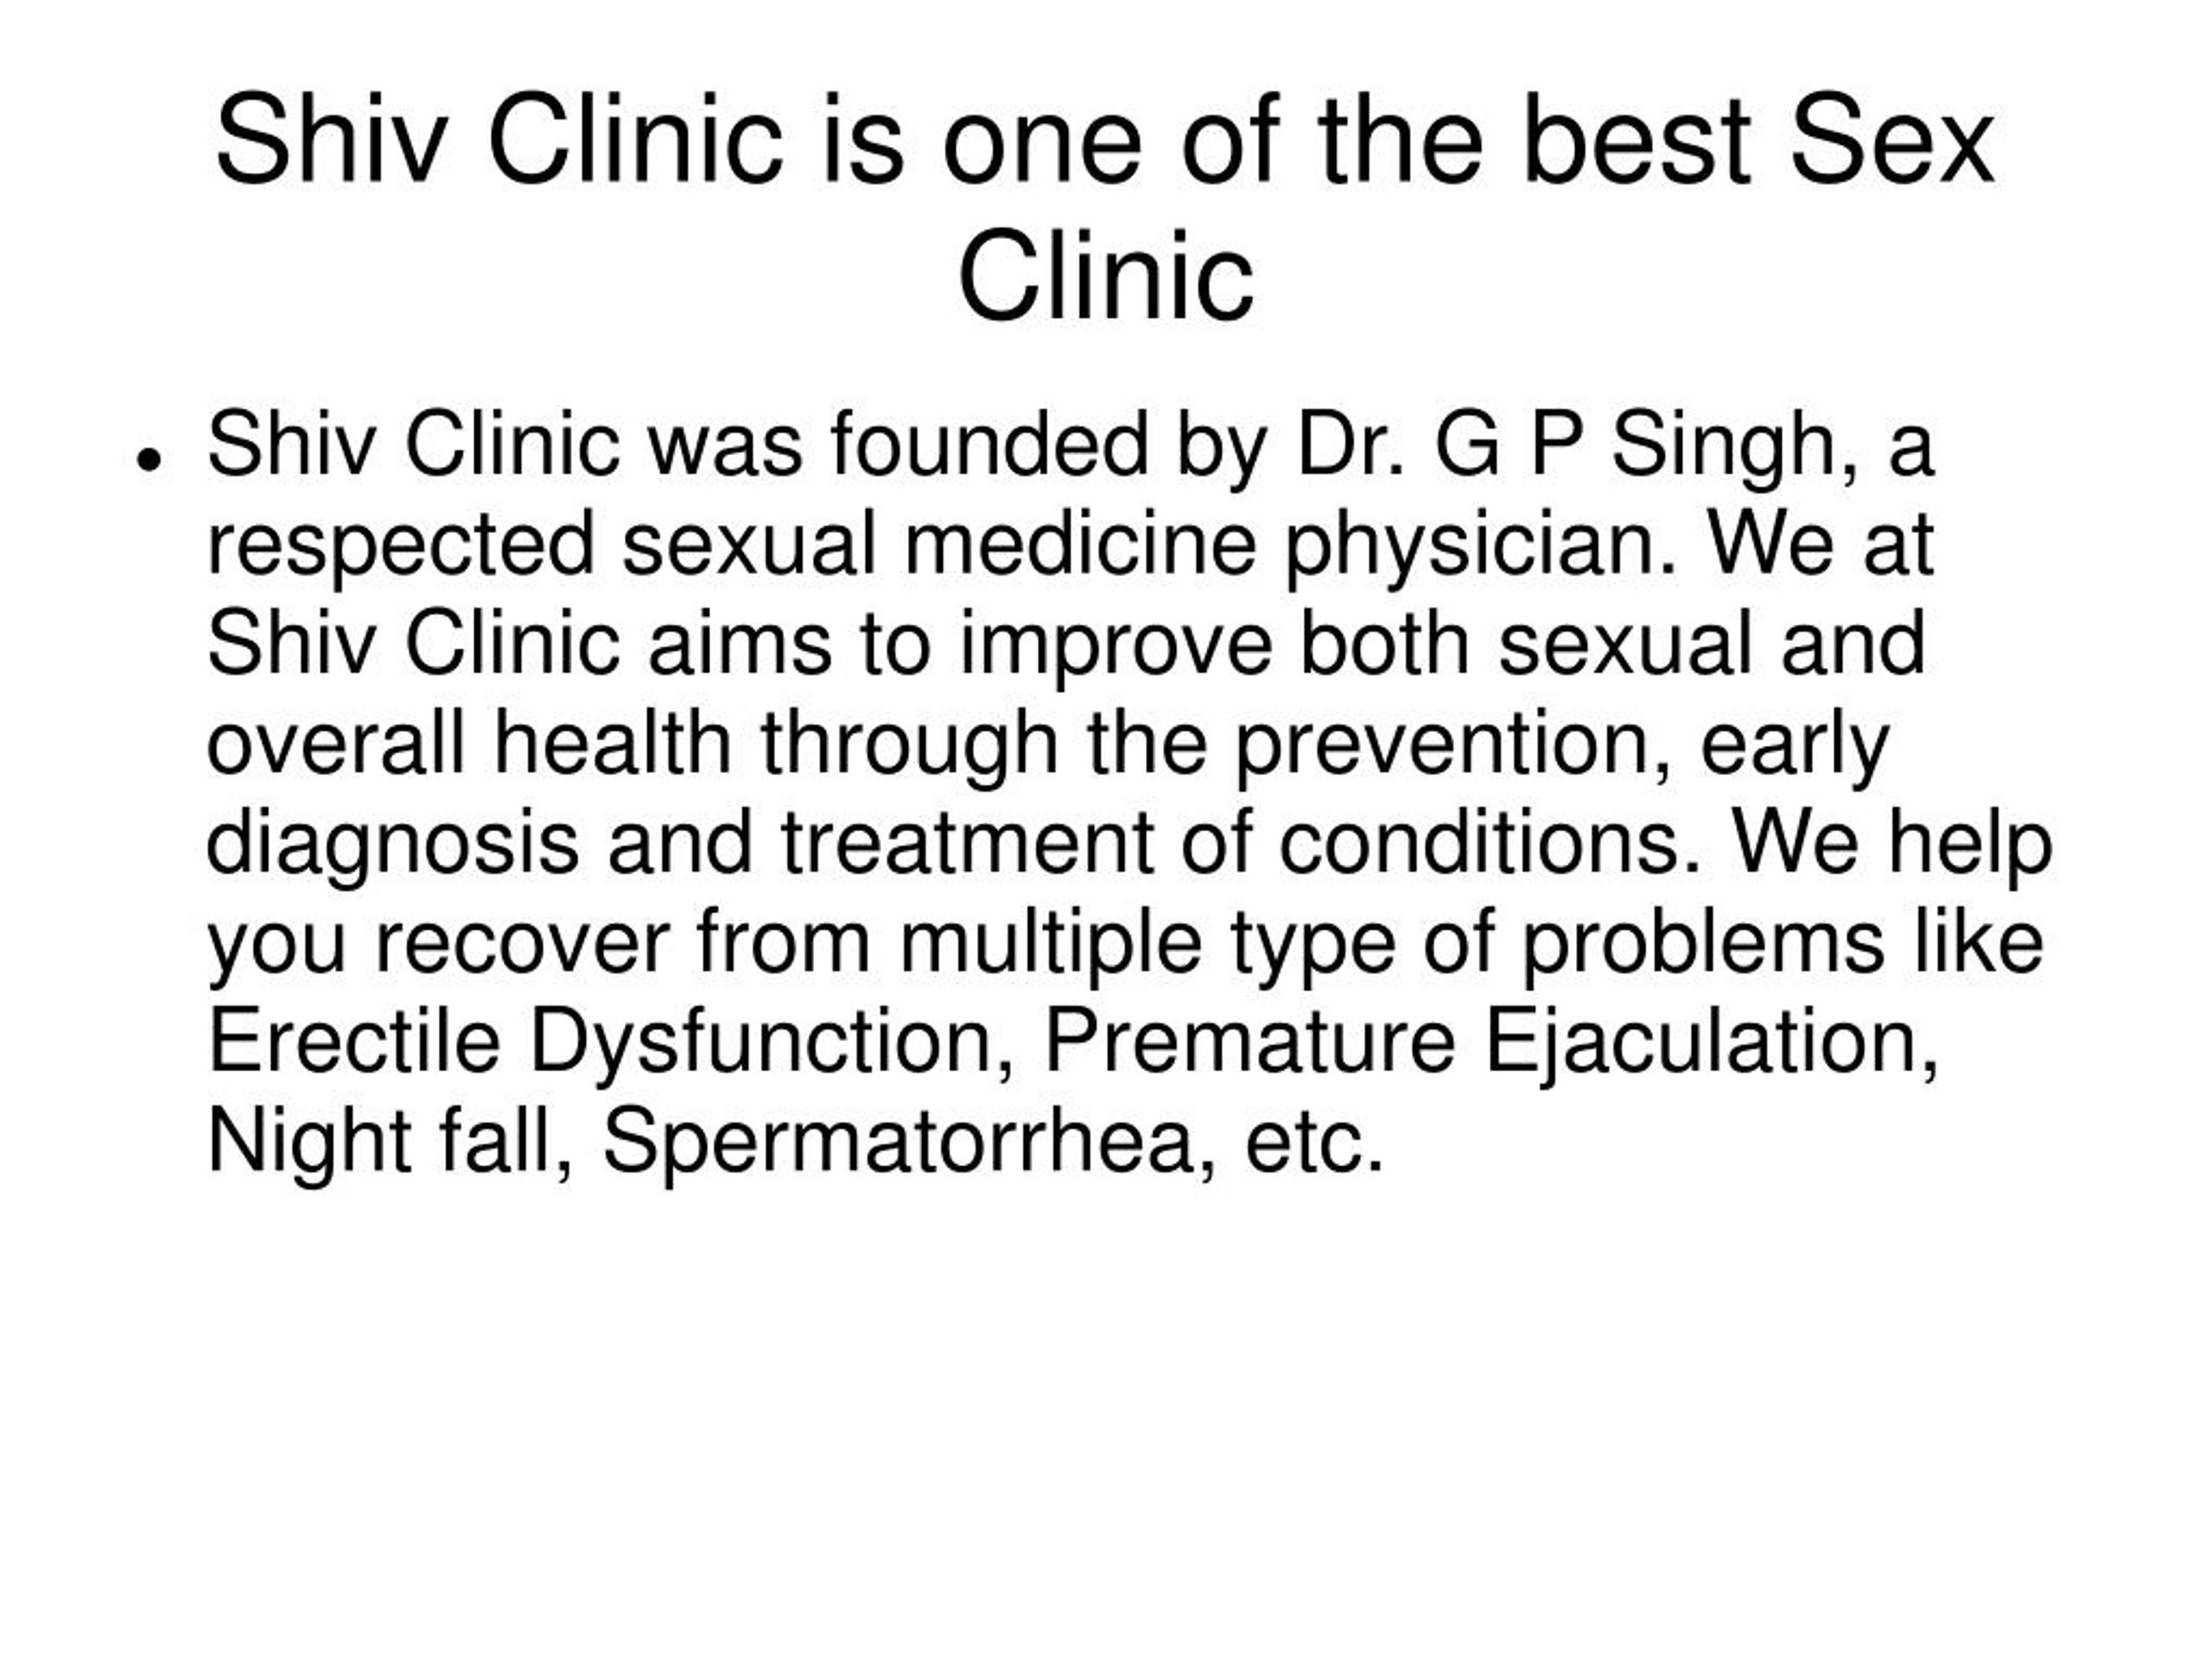 Ppt Sex Doctor In New Delhi Powerpoint Presentation Free Download Id7549720 3688